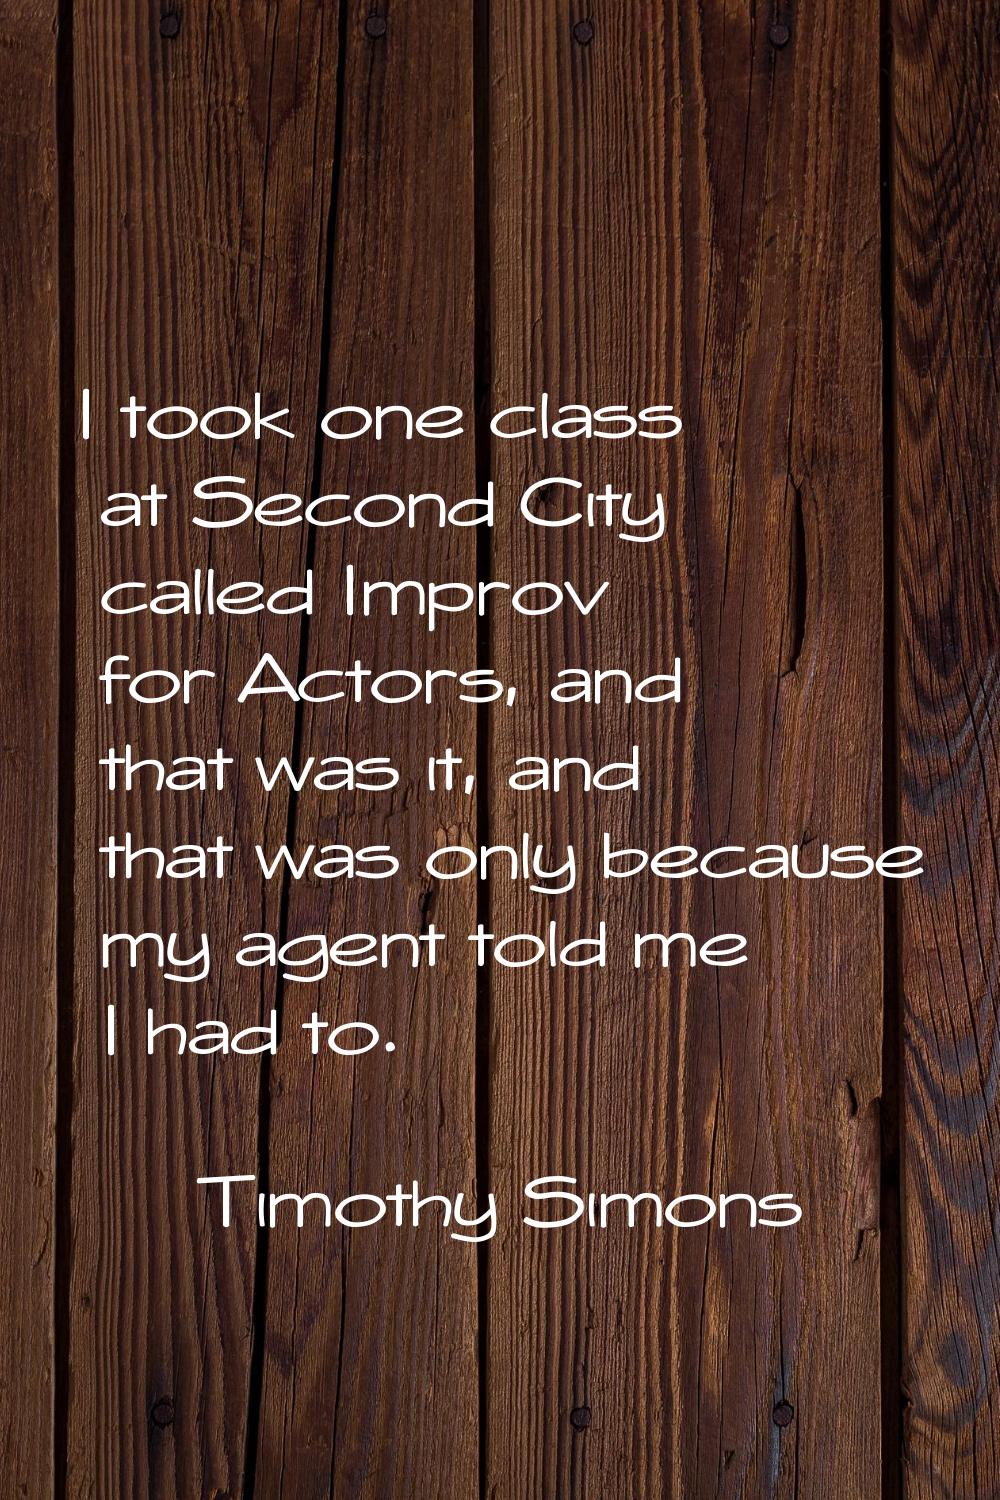 I took one class at Second City called Improv for Actors, and that was it, and that was only becaus